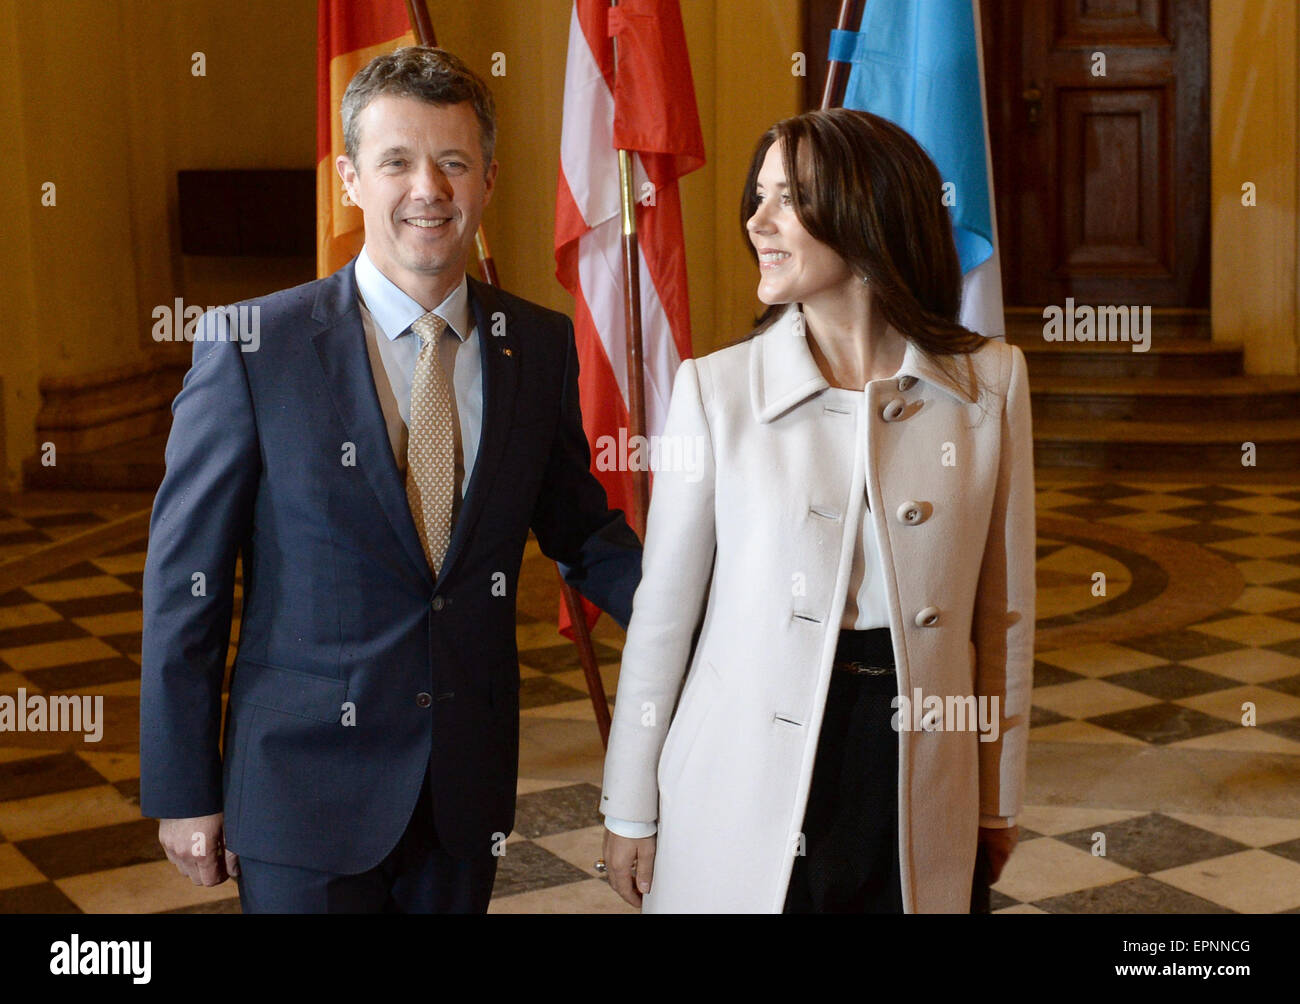 munich-germany-20th-may-2015-frederik-crown-prince-of-denmark-and-EPNNCG.jpg